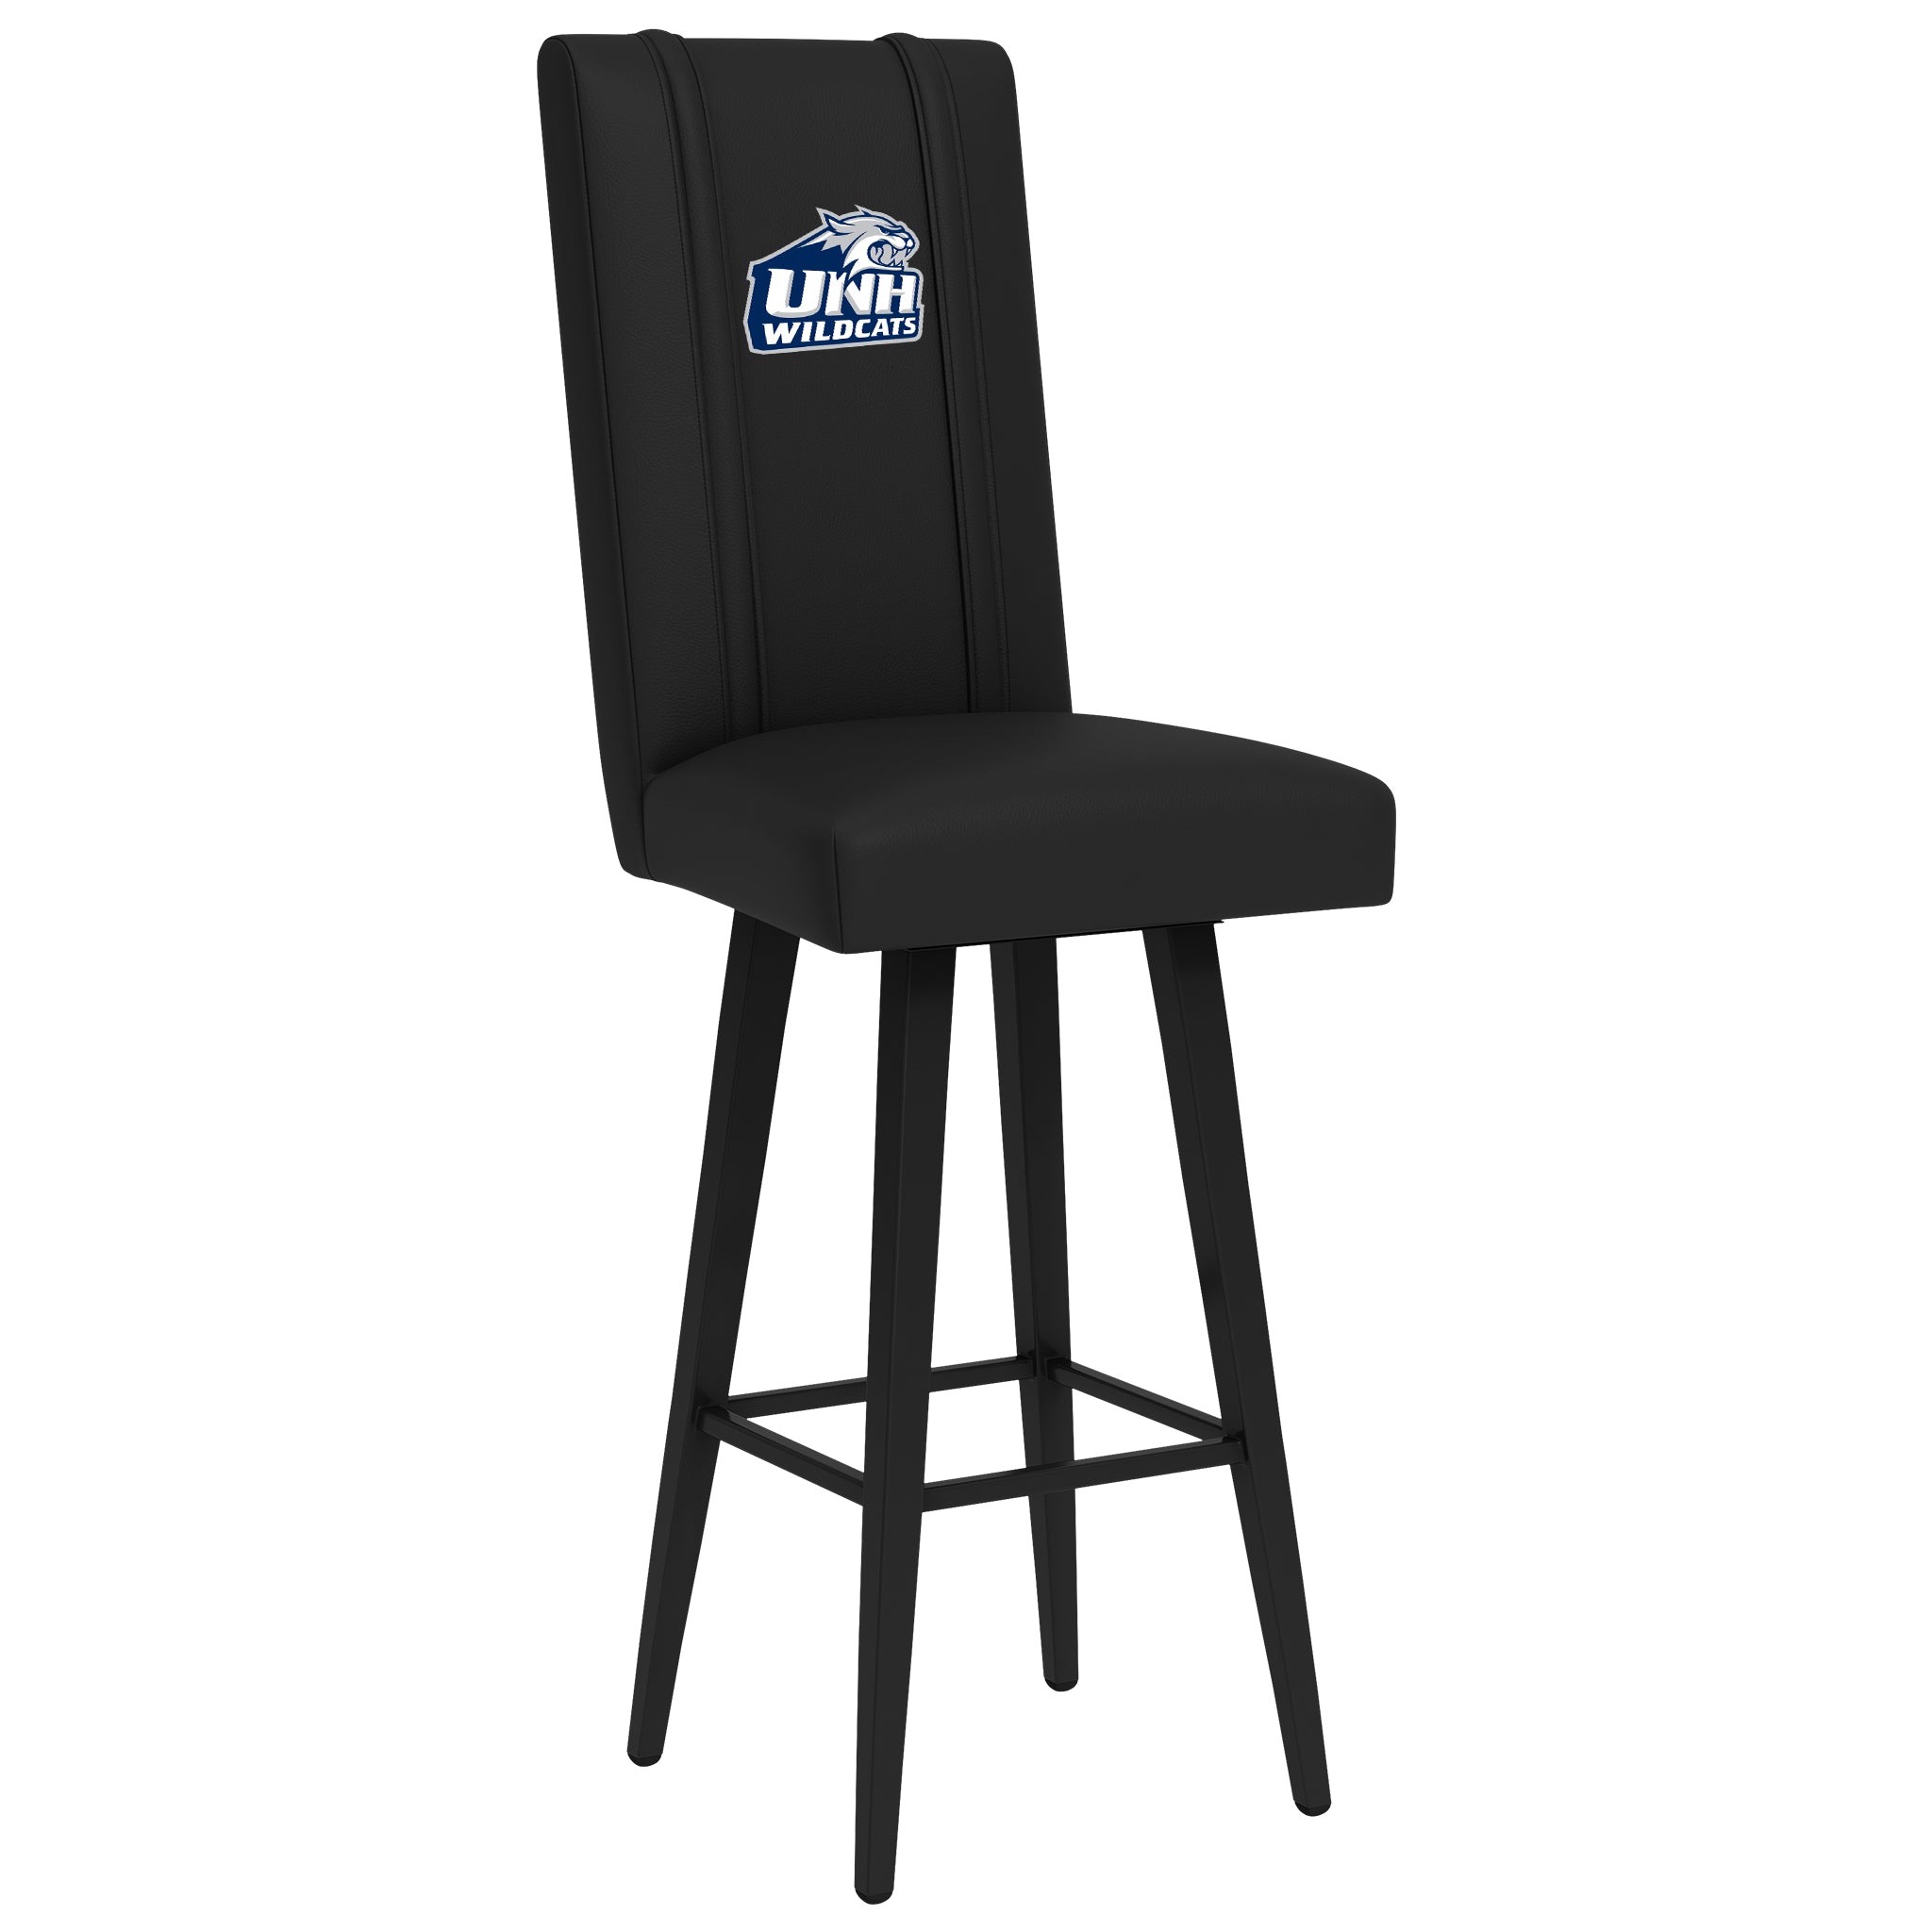 New Hampshire Wildcats Swivel Bar Stool 2000 With New Hampshire Wildcats Logo